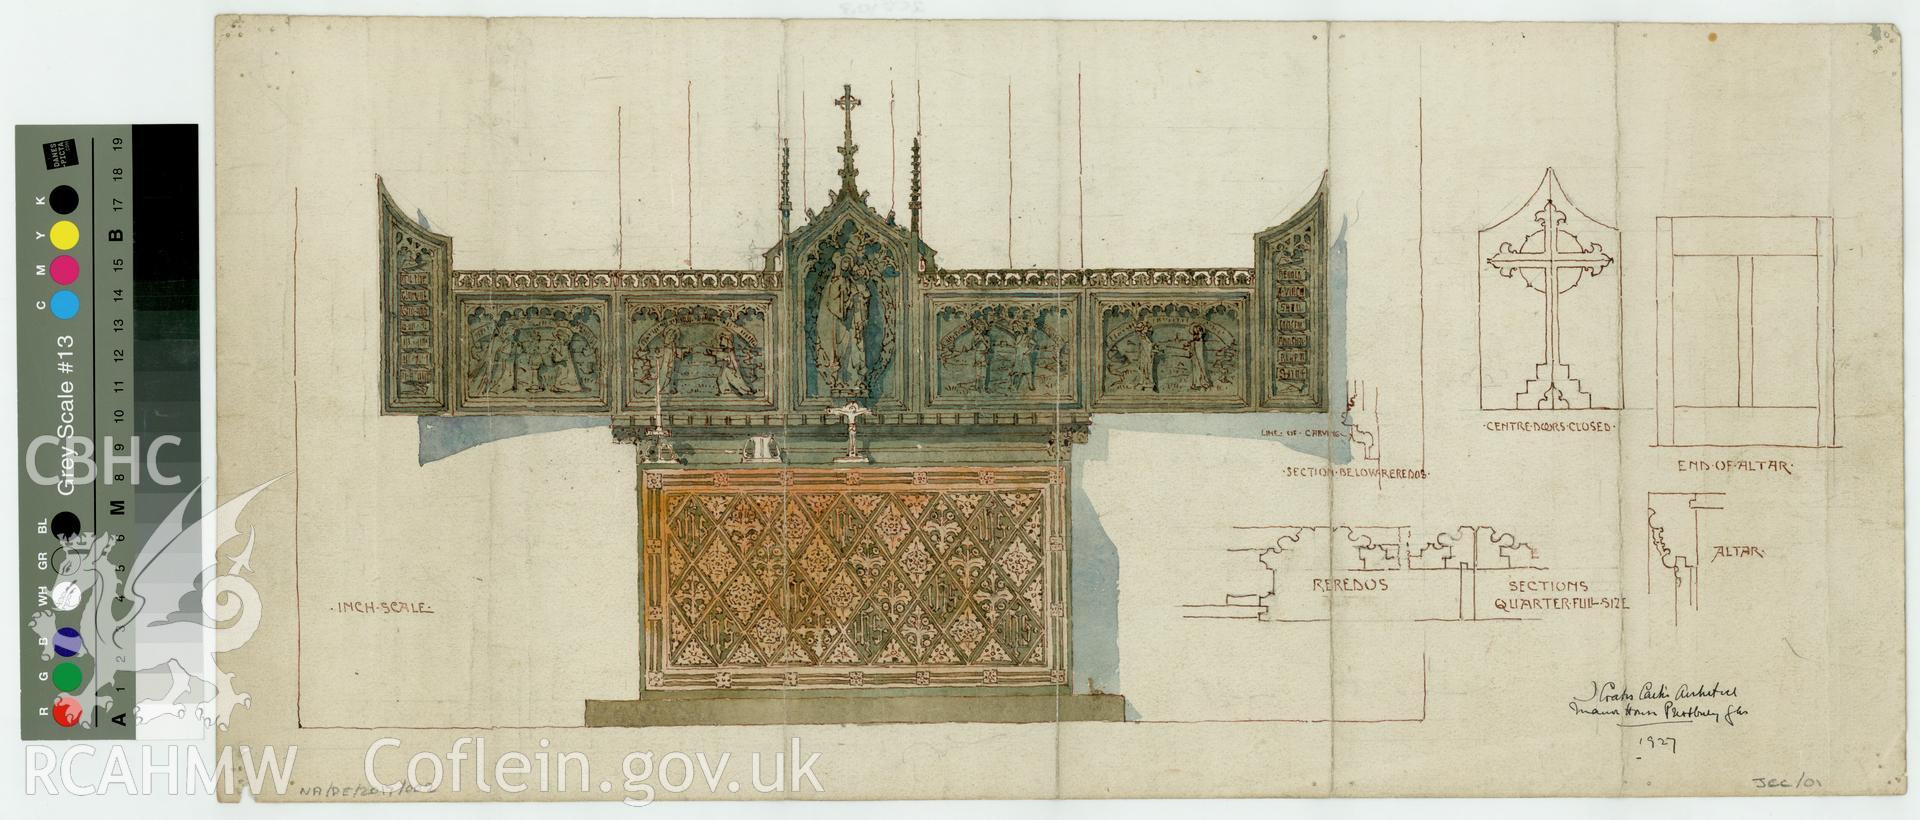 Original coloured plans of the reredos and screen at Herbrandston Church, produced by John Coates-Carter in 1927.